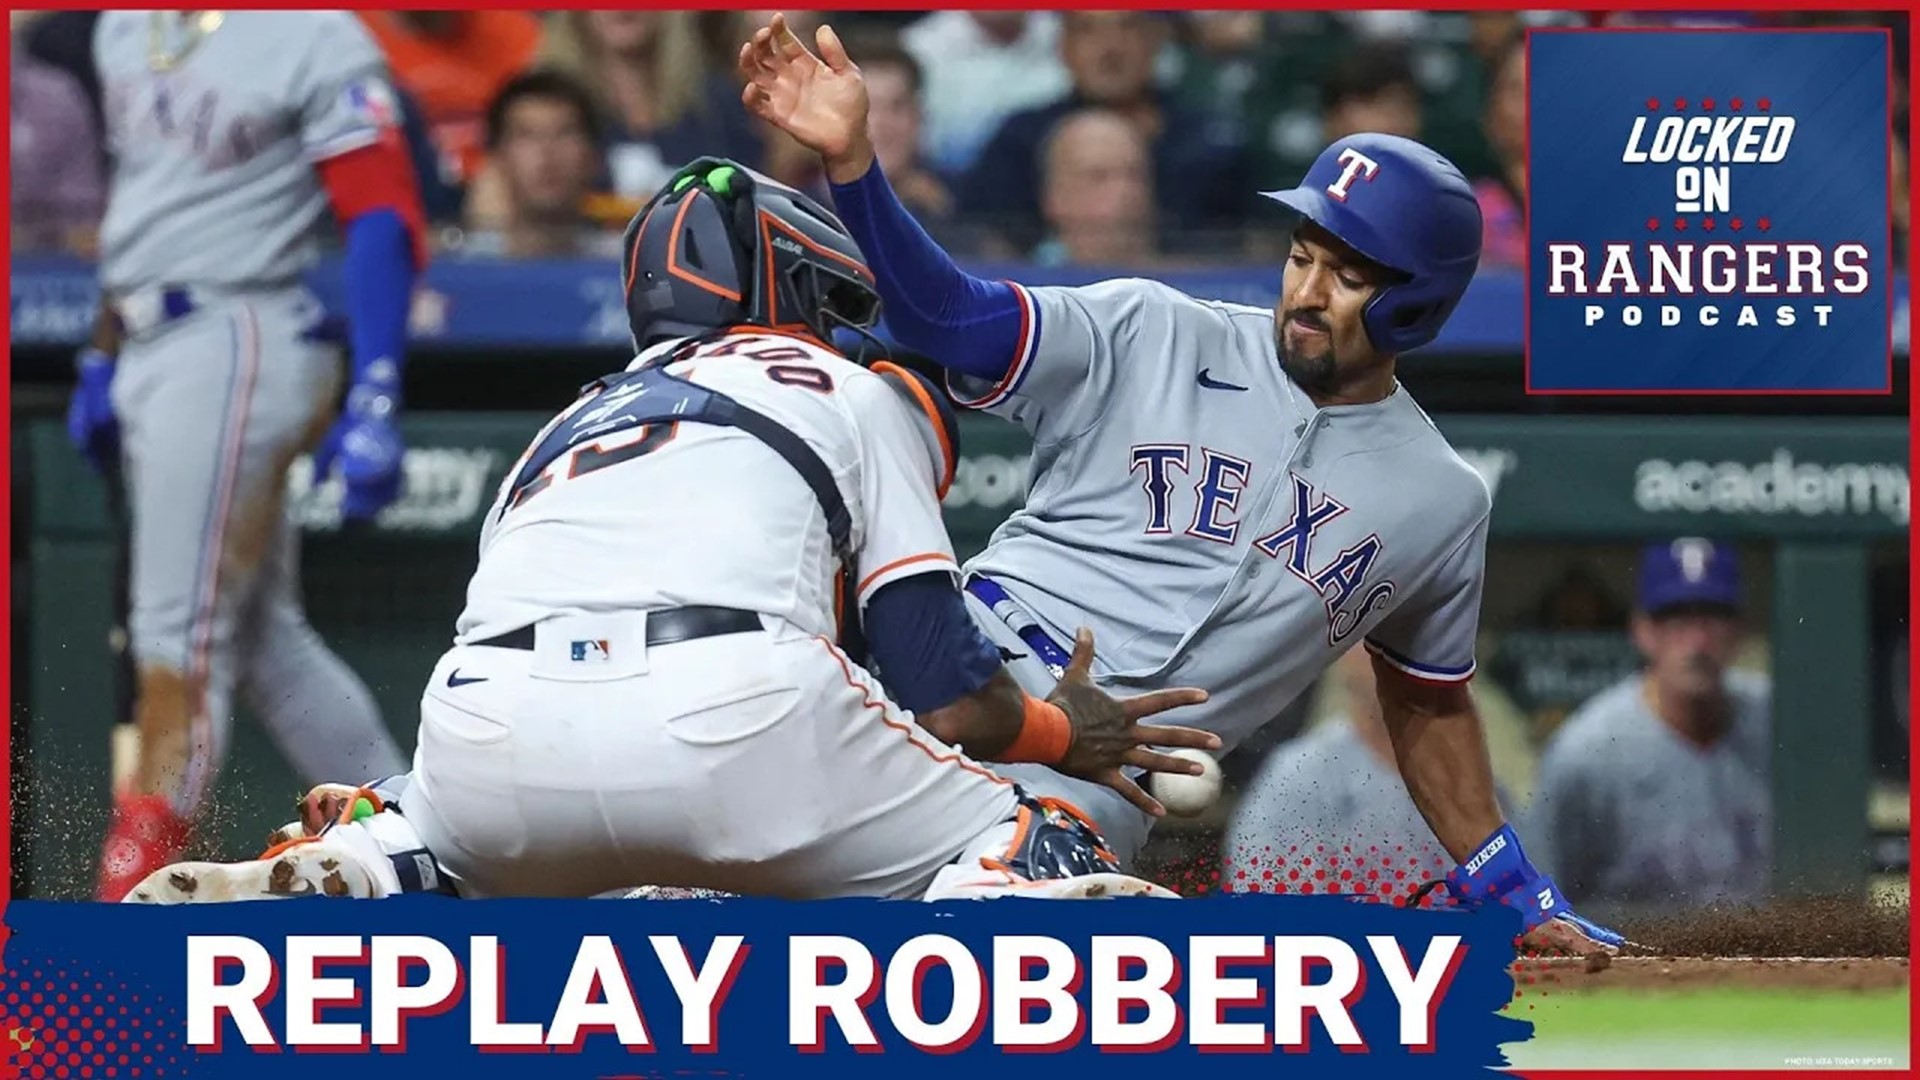 The Texas Rangers lost to the Houston Astros in another one-run game as another replay review went against Texas as Marcus Semien was ruled safe then out